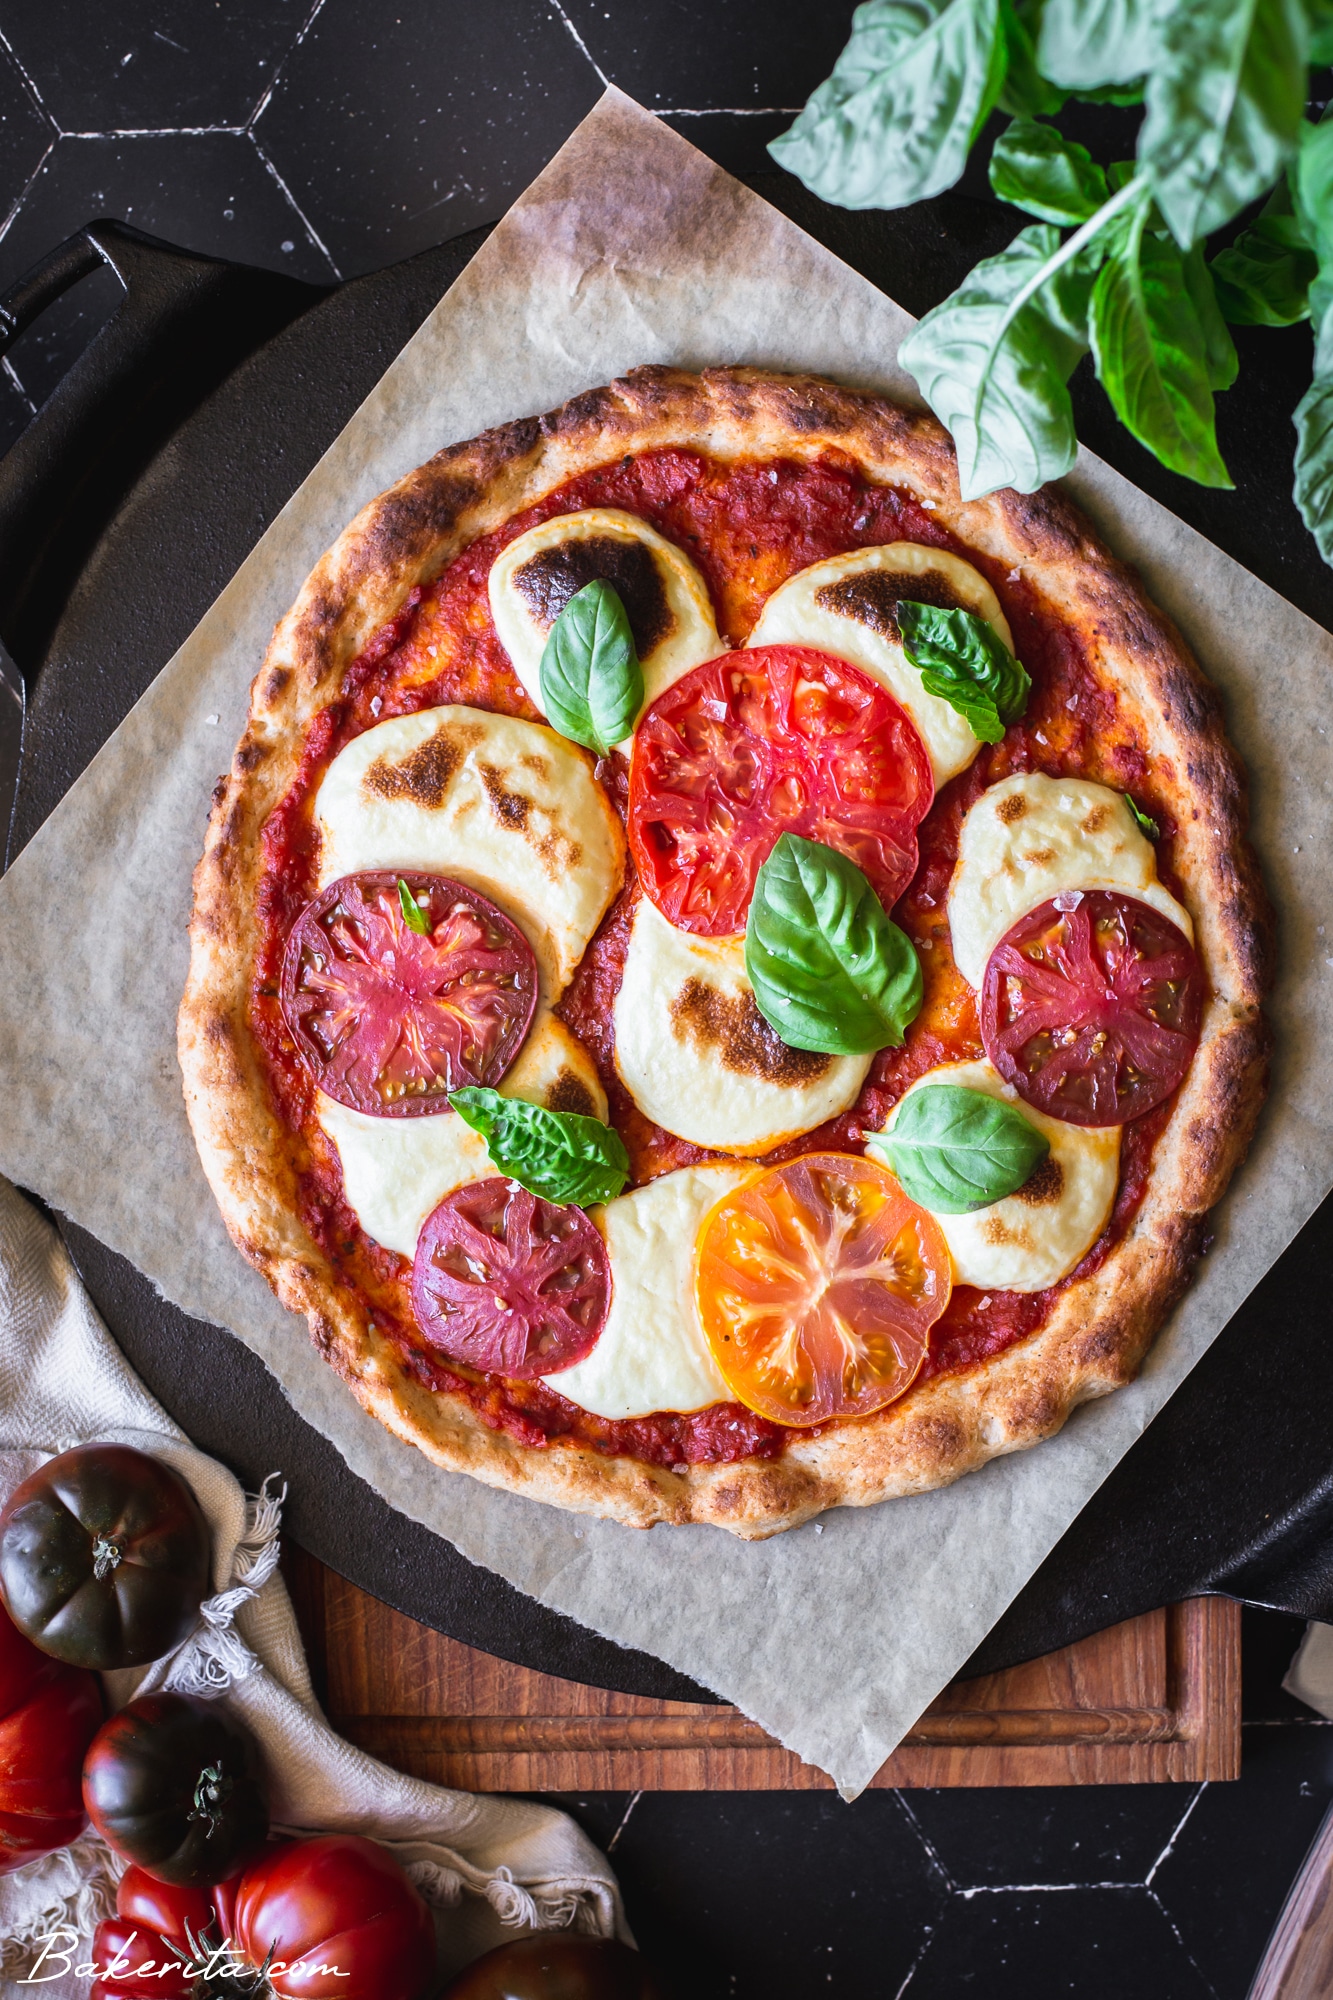 This Gluten-Free Sourdough Pizza Crust requires just six ingredients, 10 minutes, and one bowl needed to mix up the dough! This easy sourdough discard pizza dough recipe is also vegan, and couldn't be easier to make.